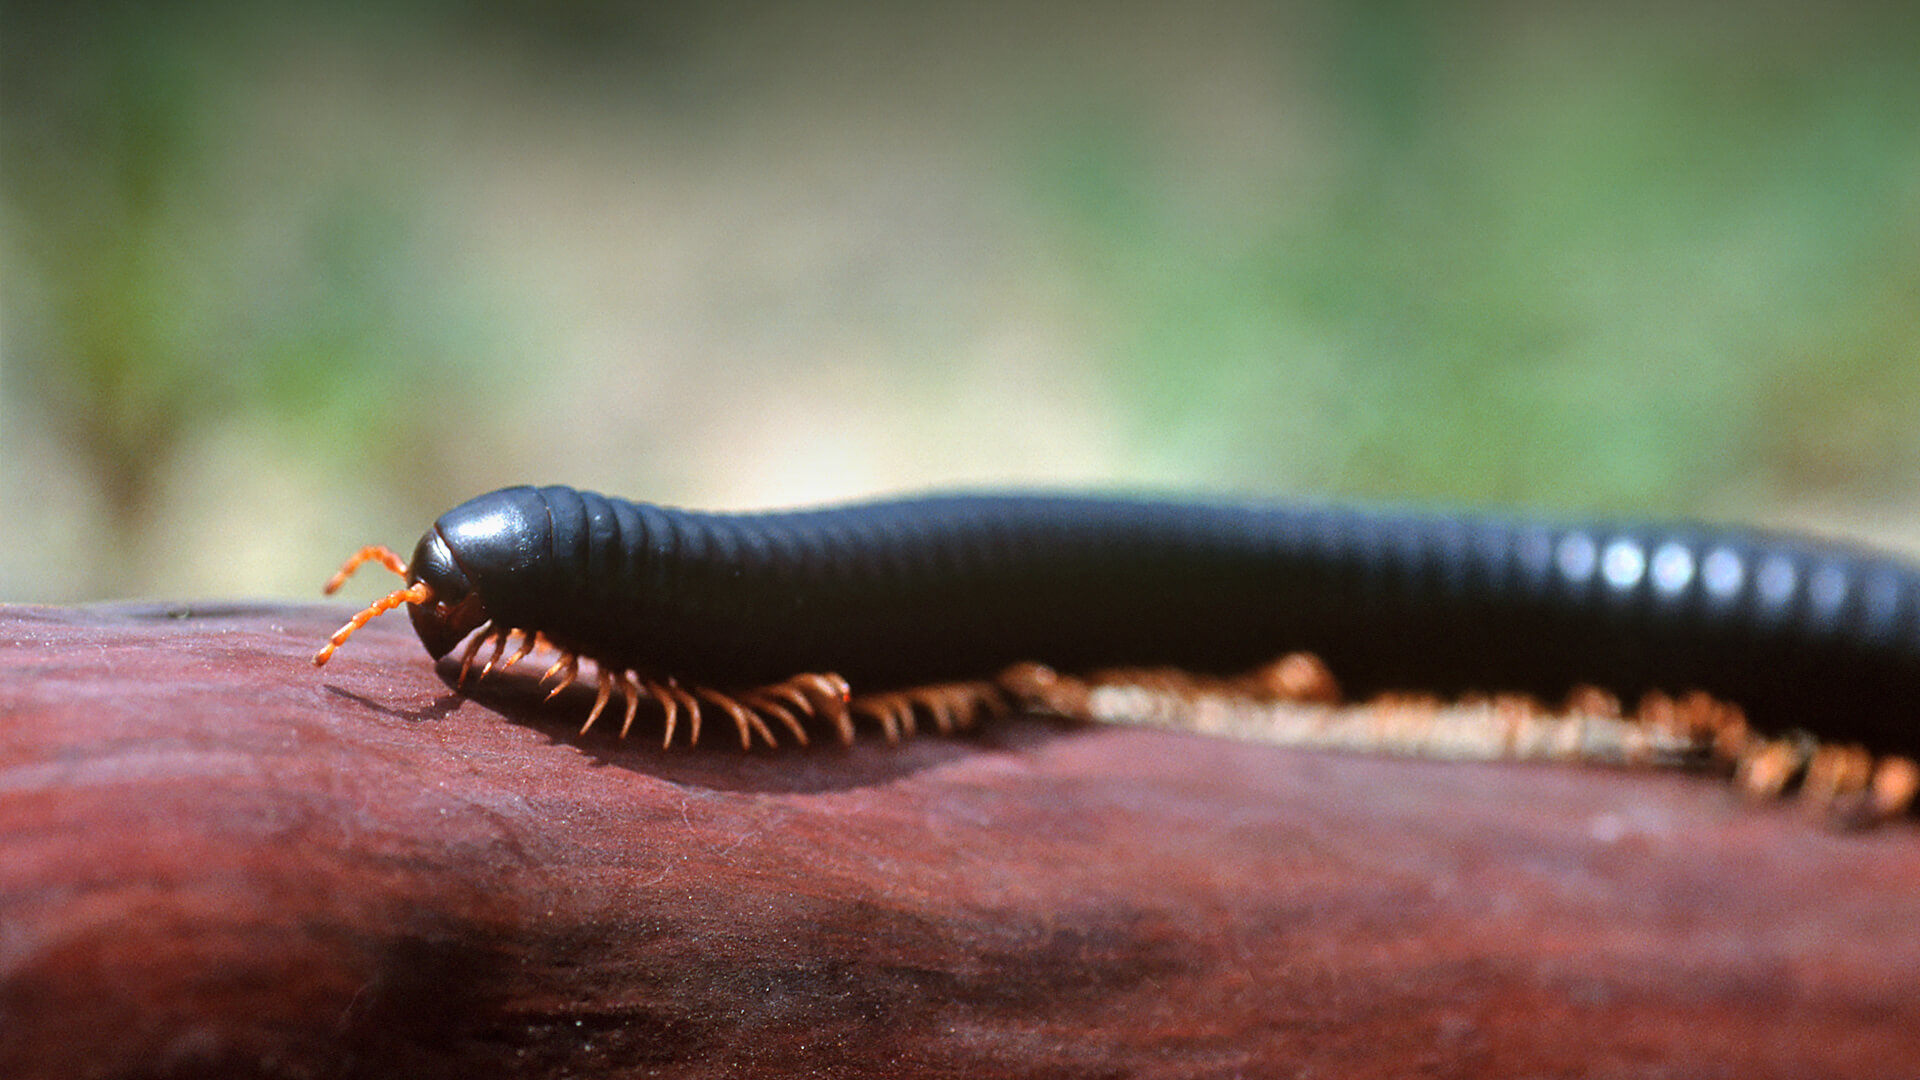 Giant African Millipede | San Diego Zoo Animals & Plants